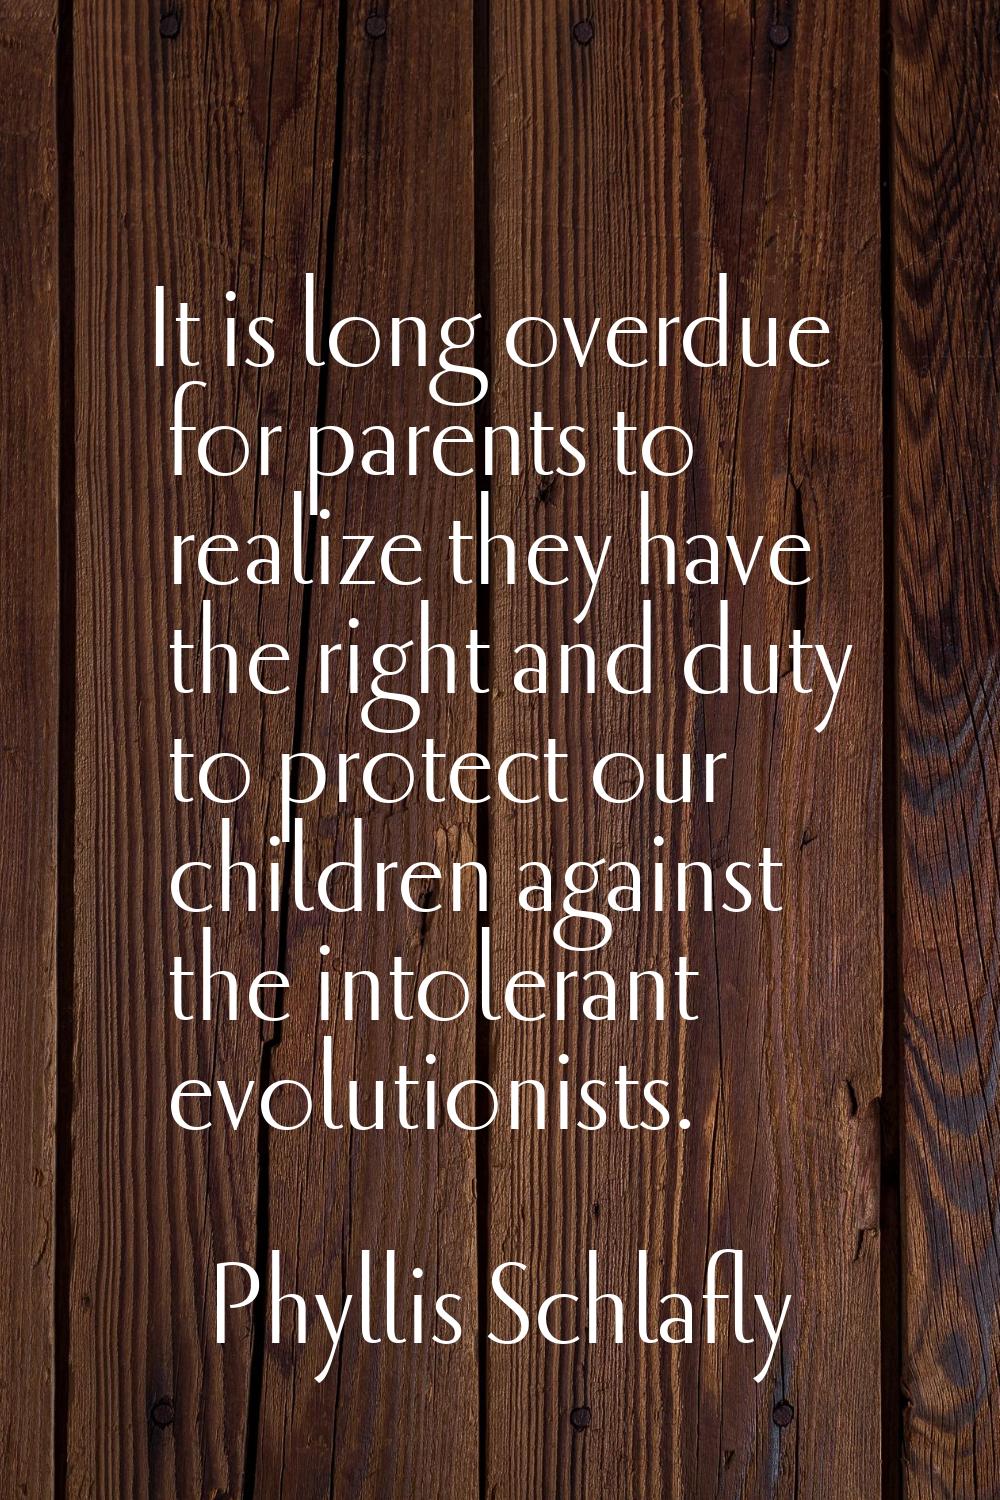 It is long overdue for parents to realize they have the right and duty to protect our children agai